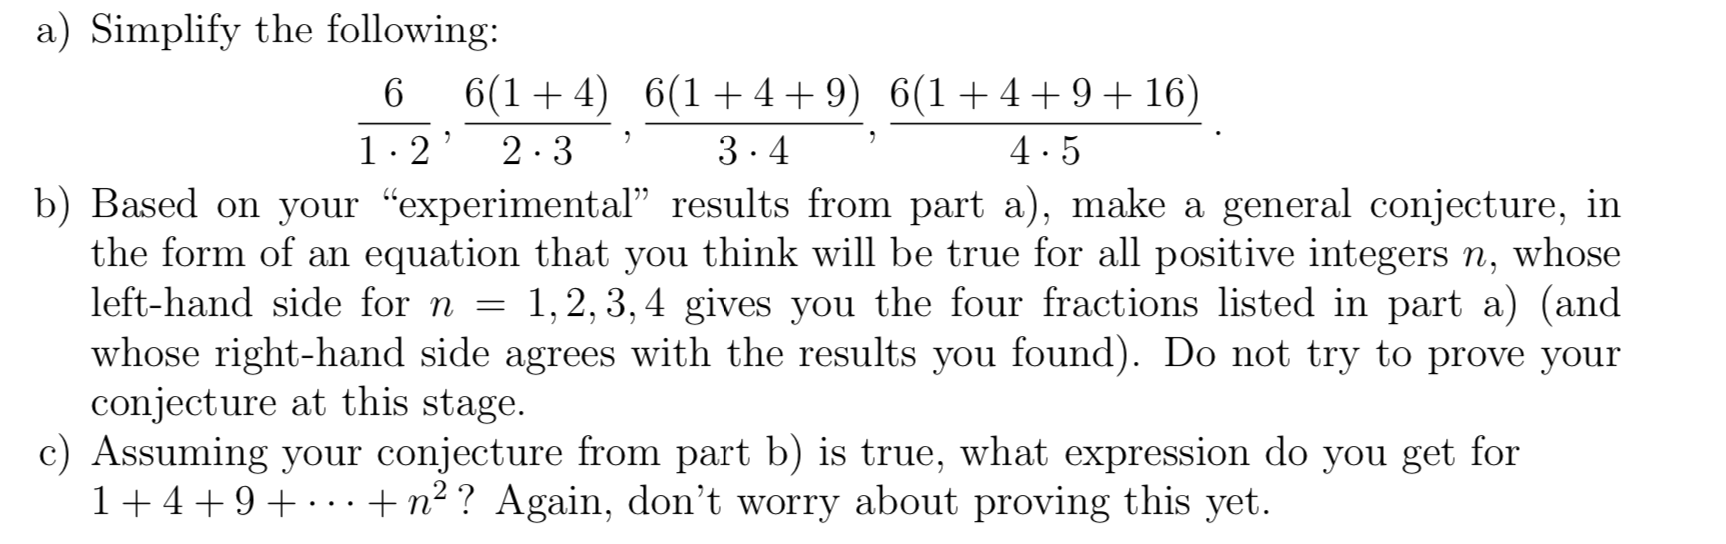 a) Simplify the following:
6(1 + 4) 6(1+ 4+ 9) 6(1+4+ 9+ 16)
1.2' 2.3
3.4
4.5
b) Based on your "experimental" results from part a), make a general conjecture, in
the form of an equation that you think will be true for all positive integers n, whose
left-hand side for n = 1,2, 3, 4 gives you the four fractions listed in part a) (and
whose right-hand side agrees with the results you found). Do not try to prove your
conjecture at this stage.
Assuming your conjecture from part b) is true, what expression do you get for
1+4+9+ ··+n² ? Again, don't worry about proving this yet.
